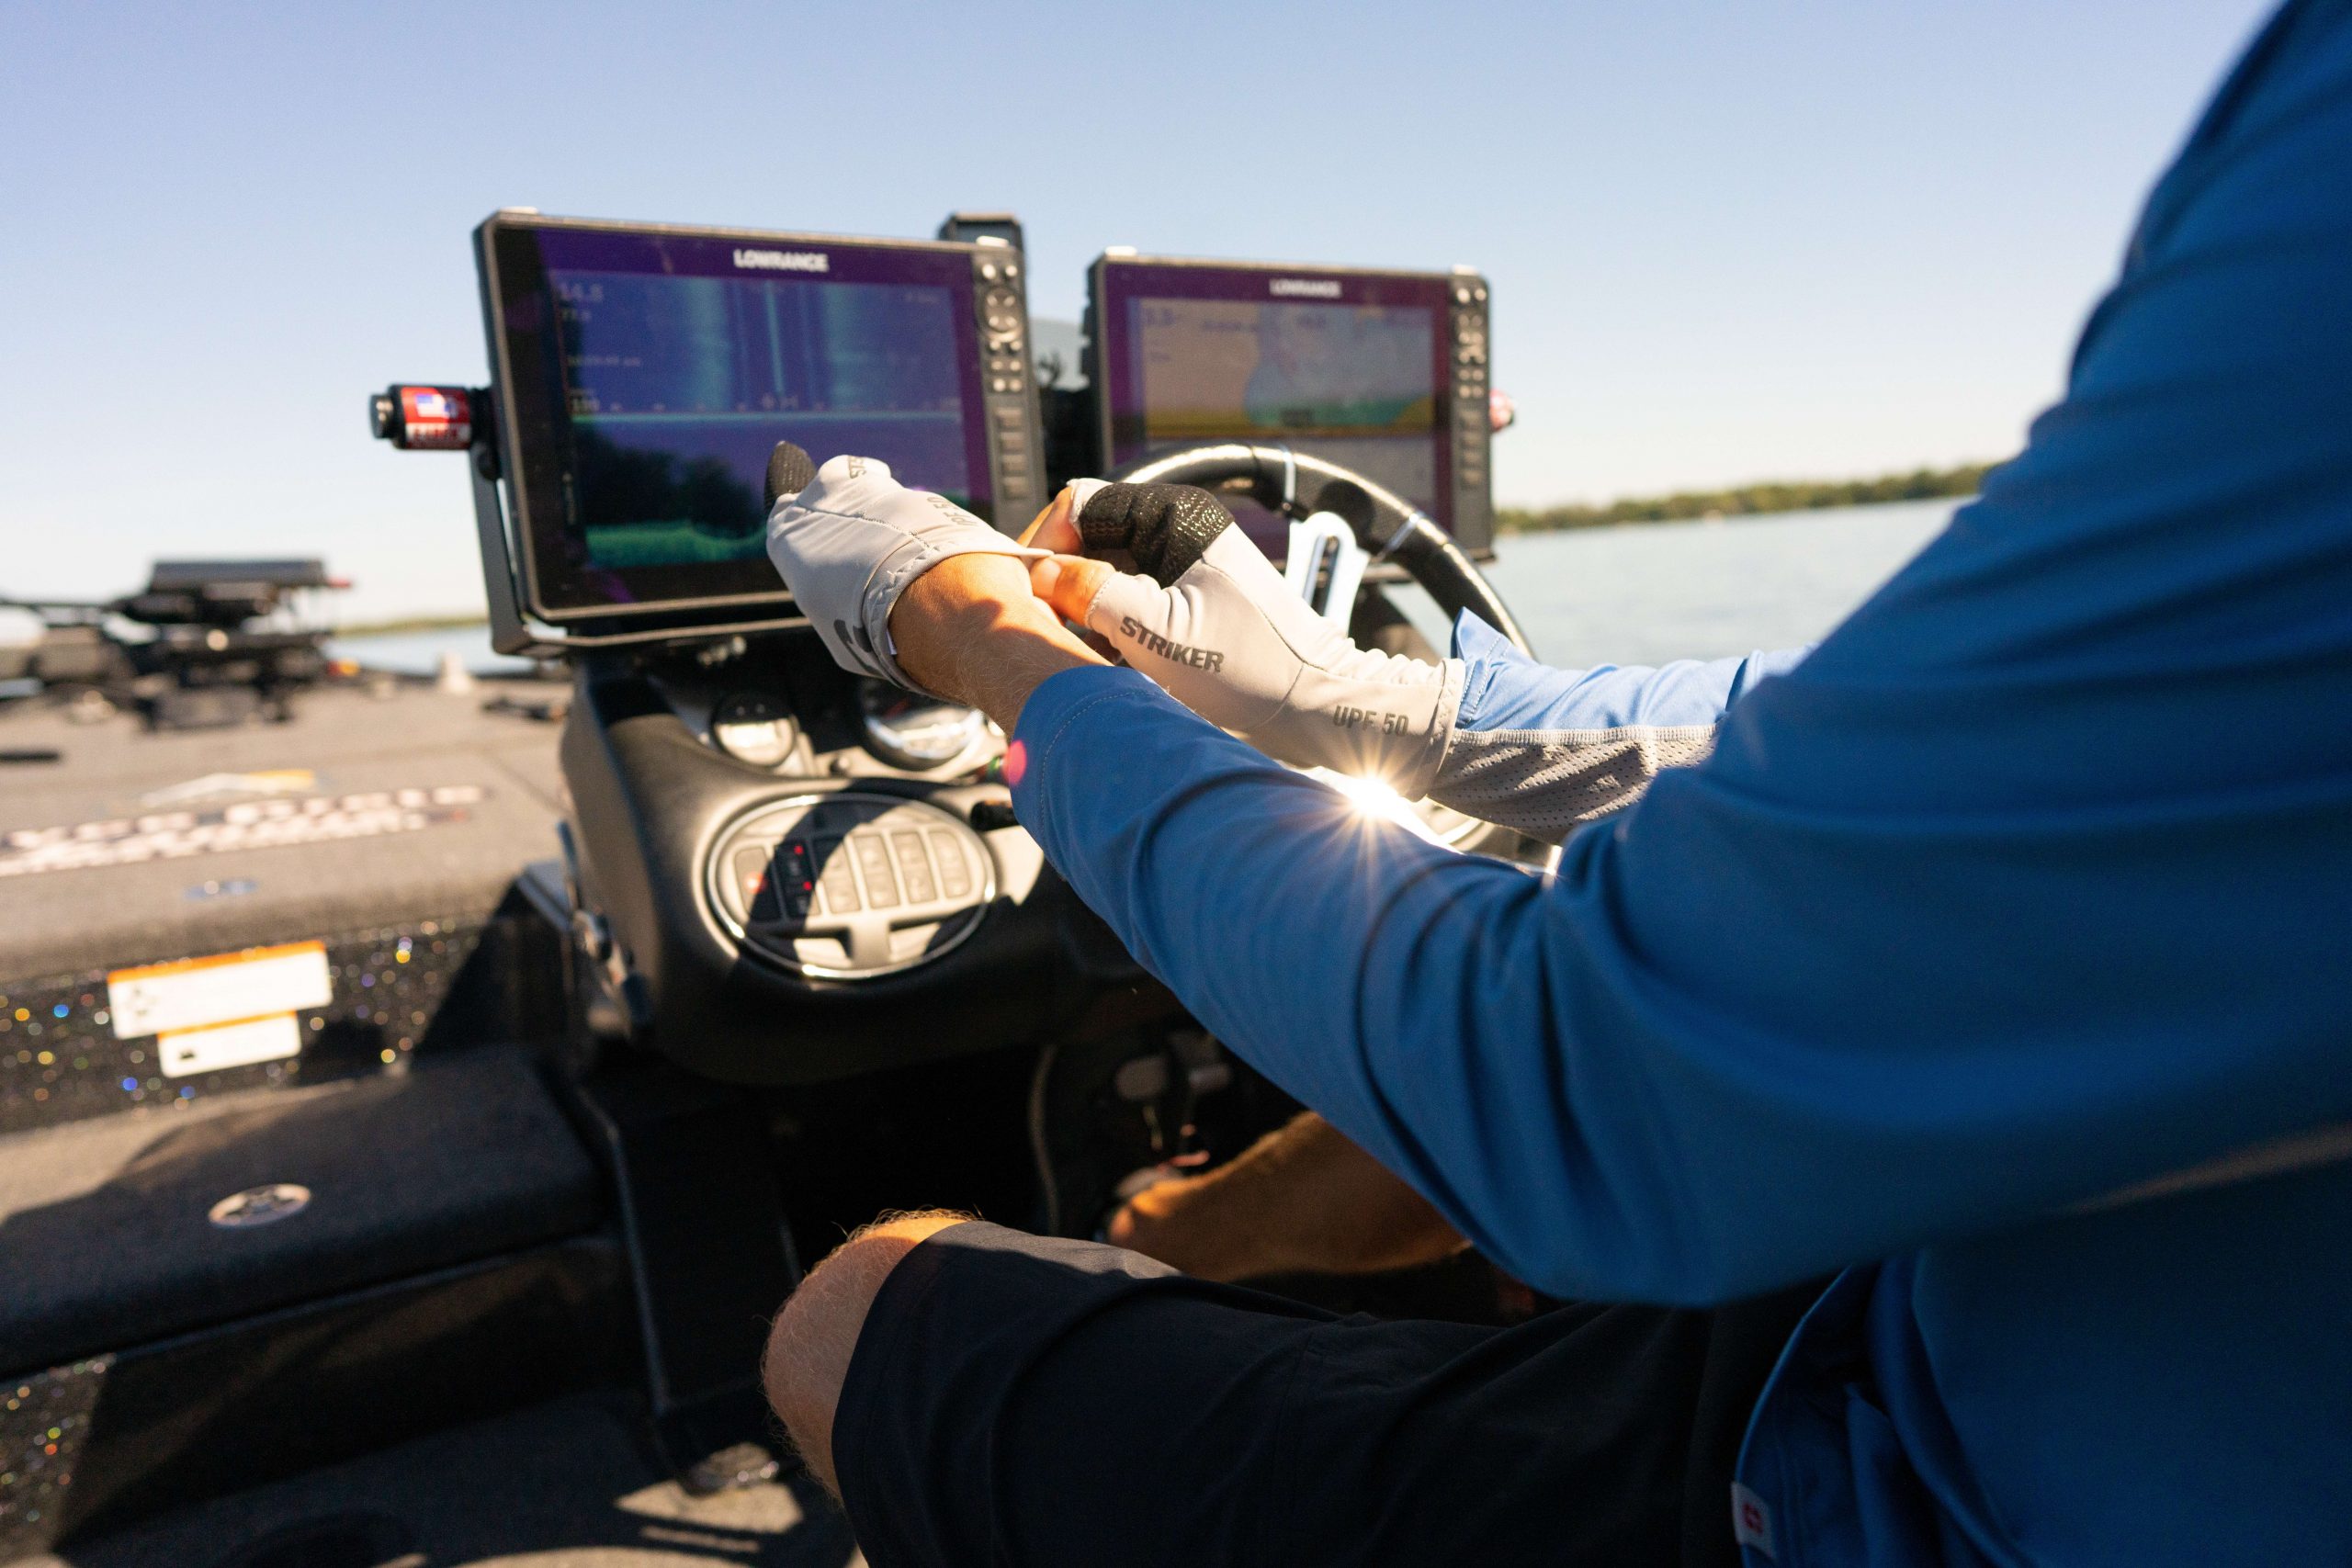 The best of both worlds, the Striker CoolWave Casting Fingerless Glove protects your hands during active casting, and the UPF 50+ fabric helps protect your skin from the blazing sun.